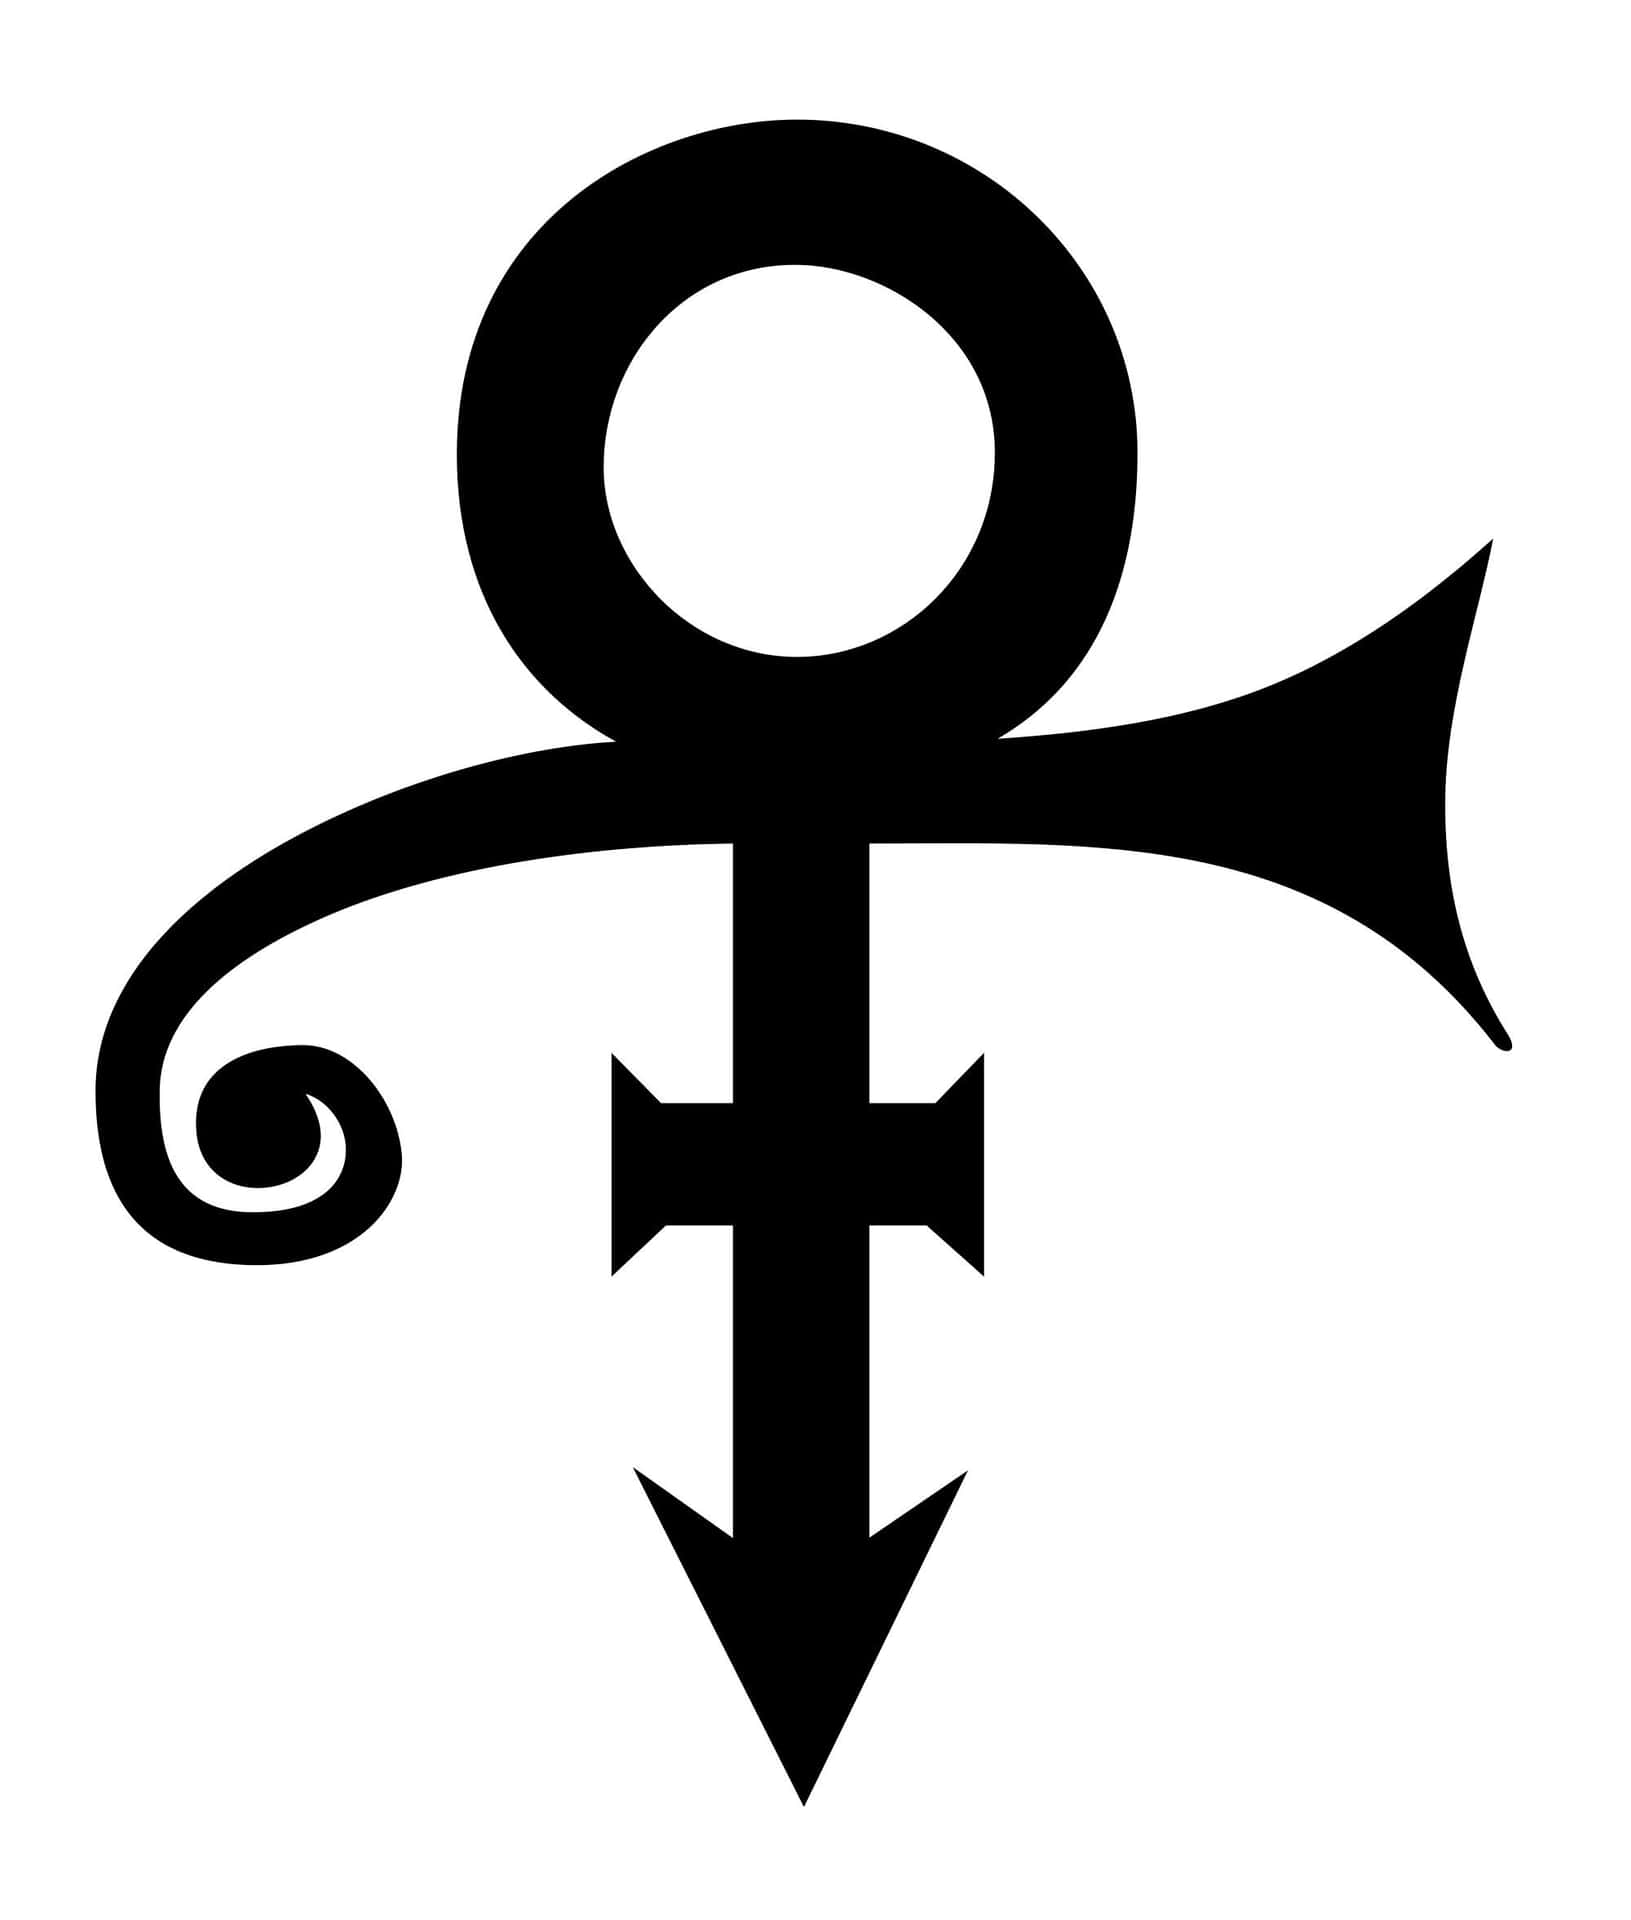 "The iconic Prince symbol" Wallpaper